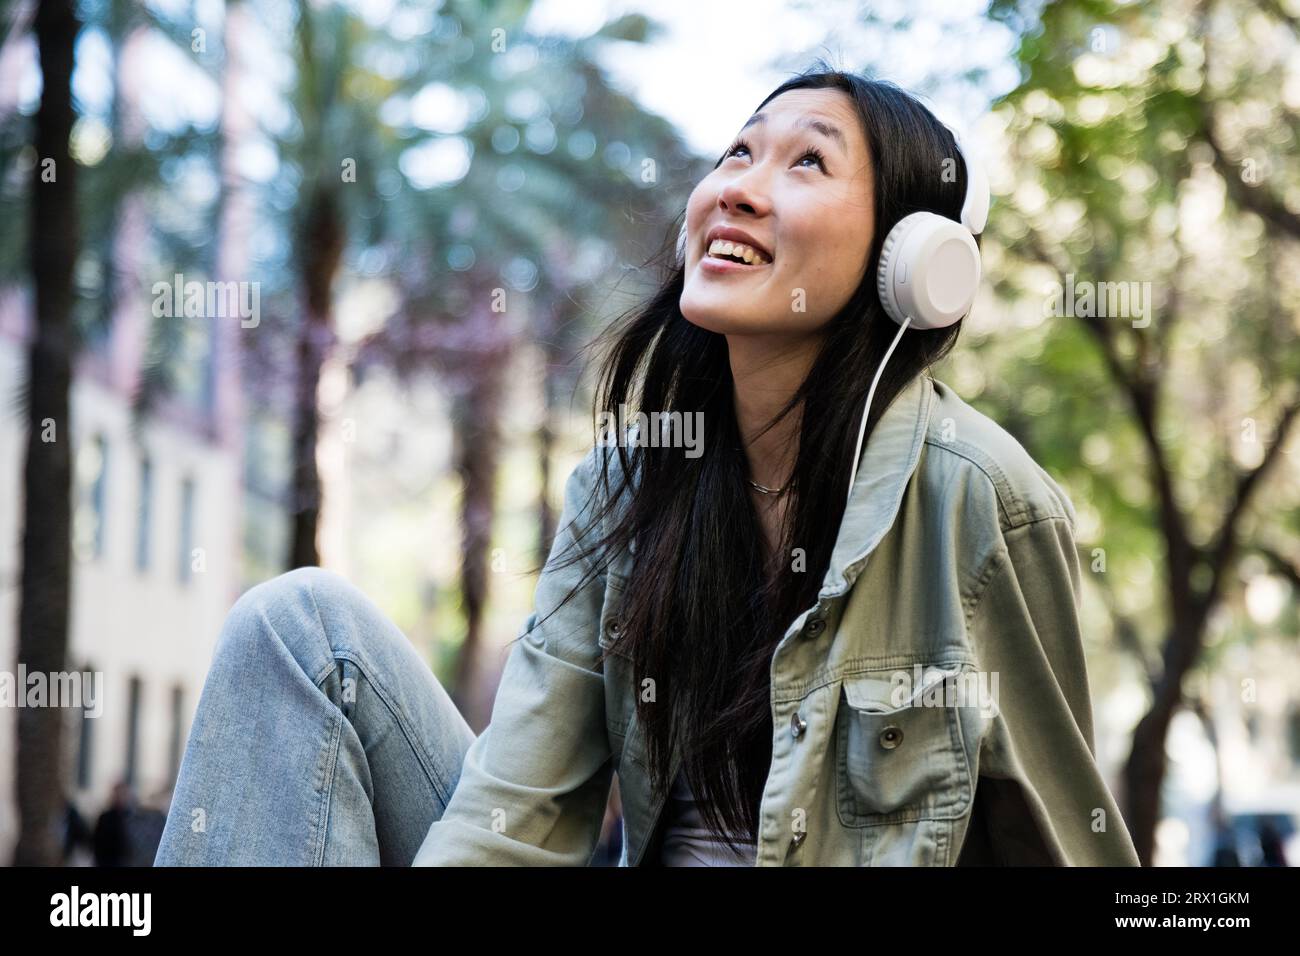 Young hopeful girl sitting on the street looking up. Stock Photo